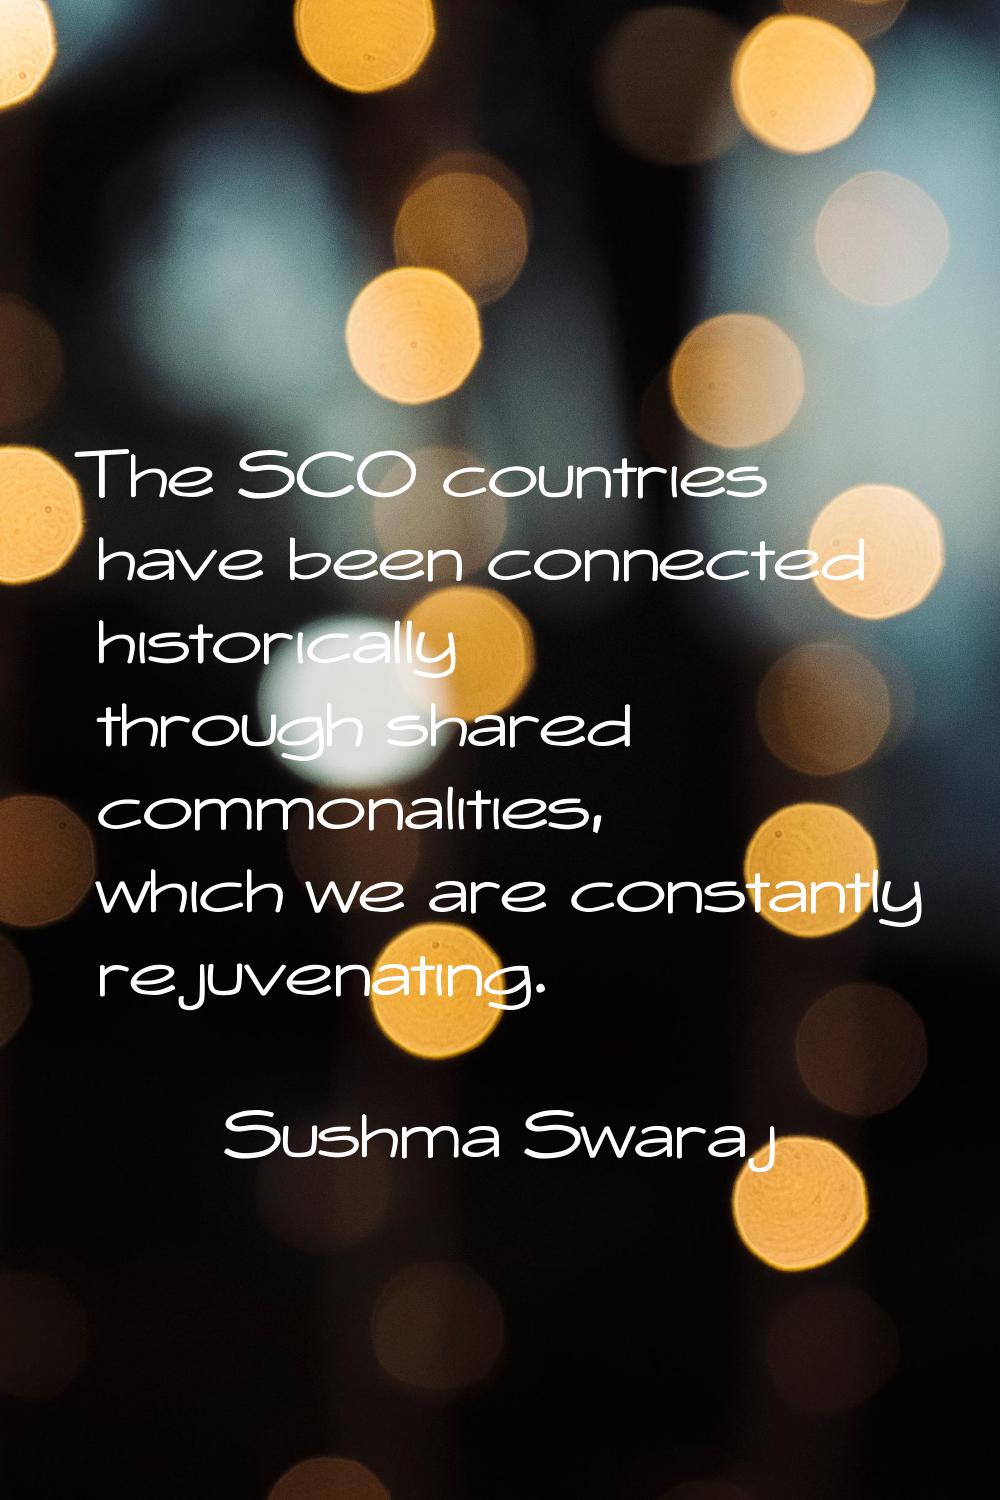 The SCO countries have been connected historically through shared commonalities, which we are const